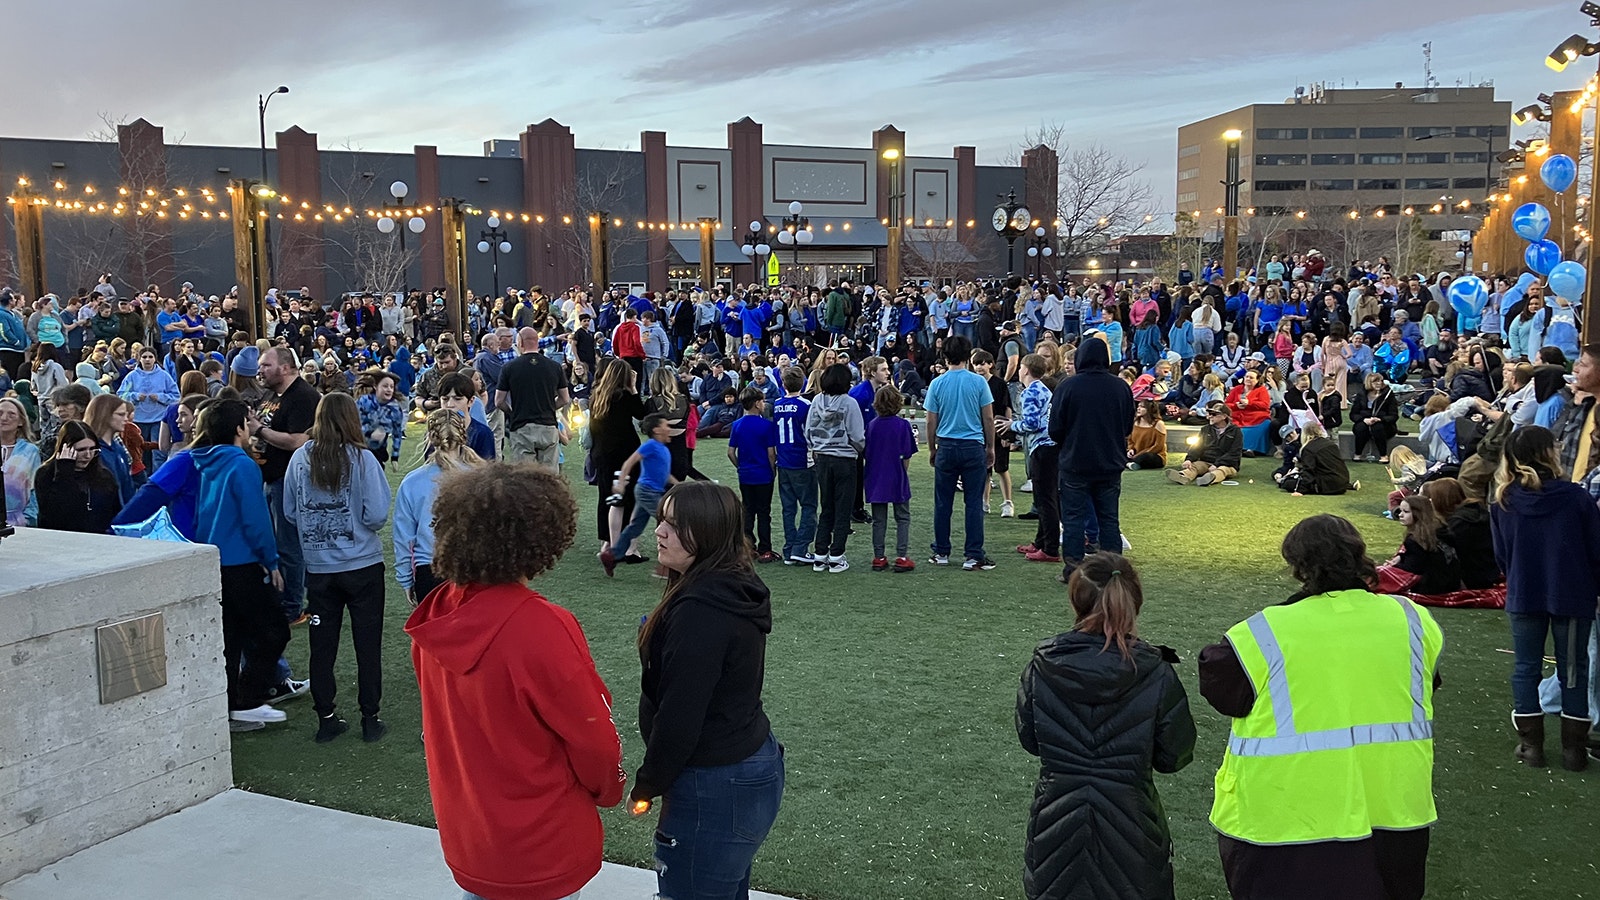 Thousands turned out Thursday night to honor the life of Bobby Maher, a 14-year-old who died following a stabbing at Eastridge Mall on Sunday.